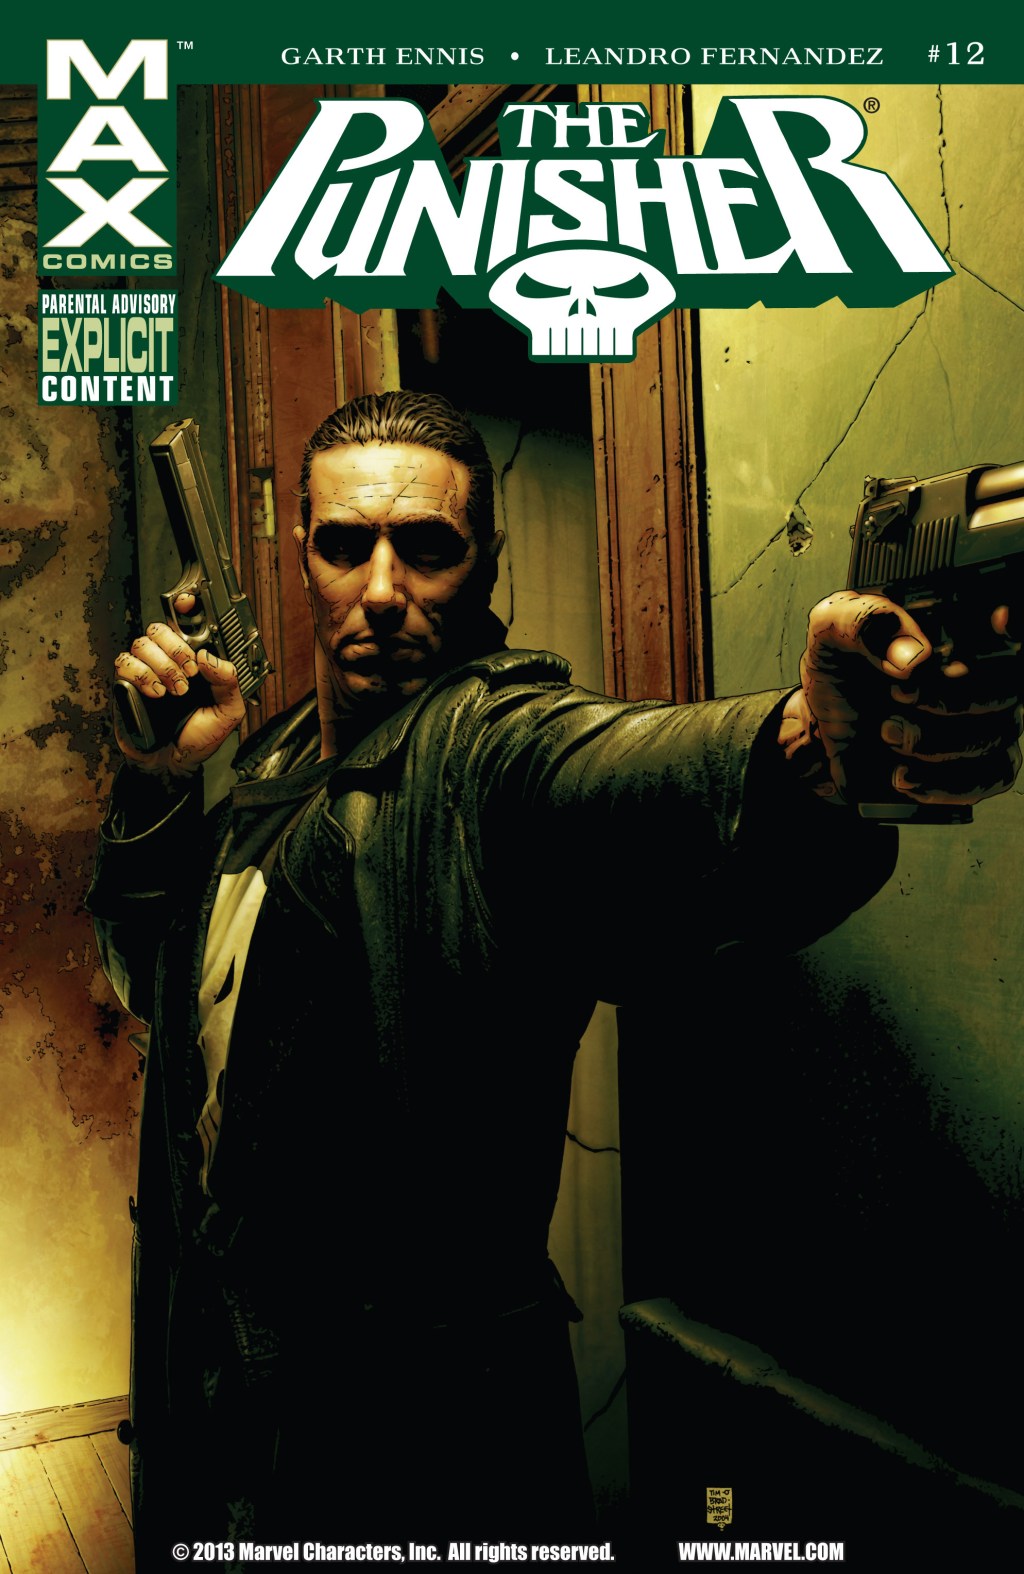 The Punisher Vol 7 Issue #12 "Kitchen Irish, Conclusion" (2004), Marvel Comics. Words by Garth Ennis. Art by Leandro Fernandez and Dean White